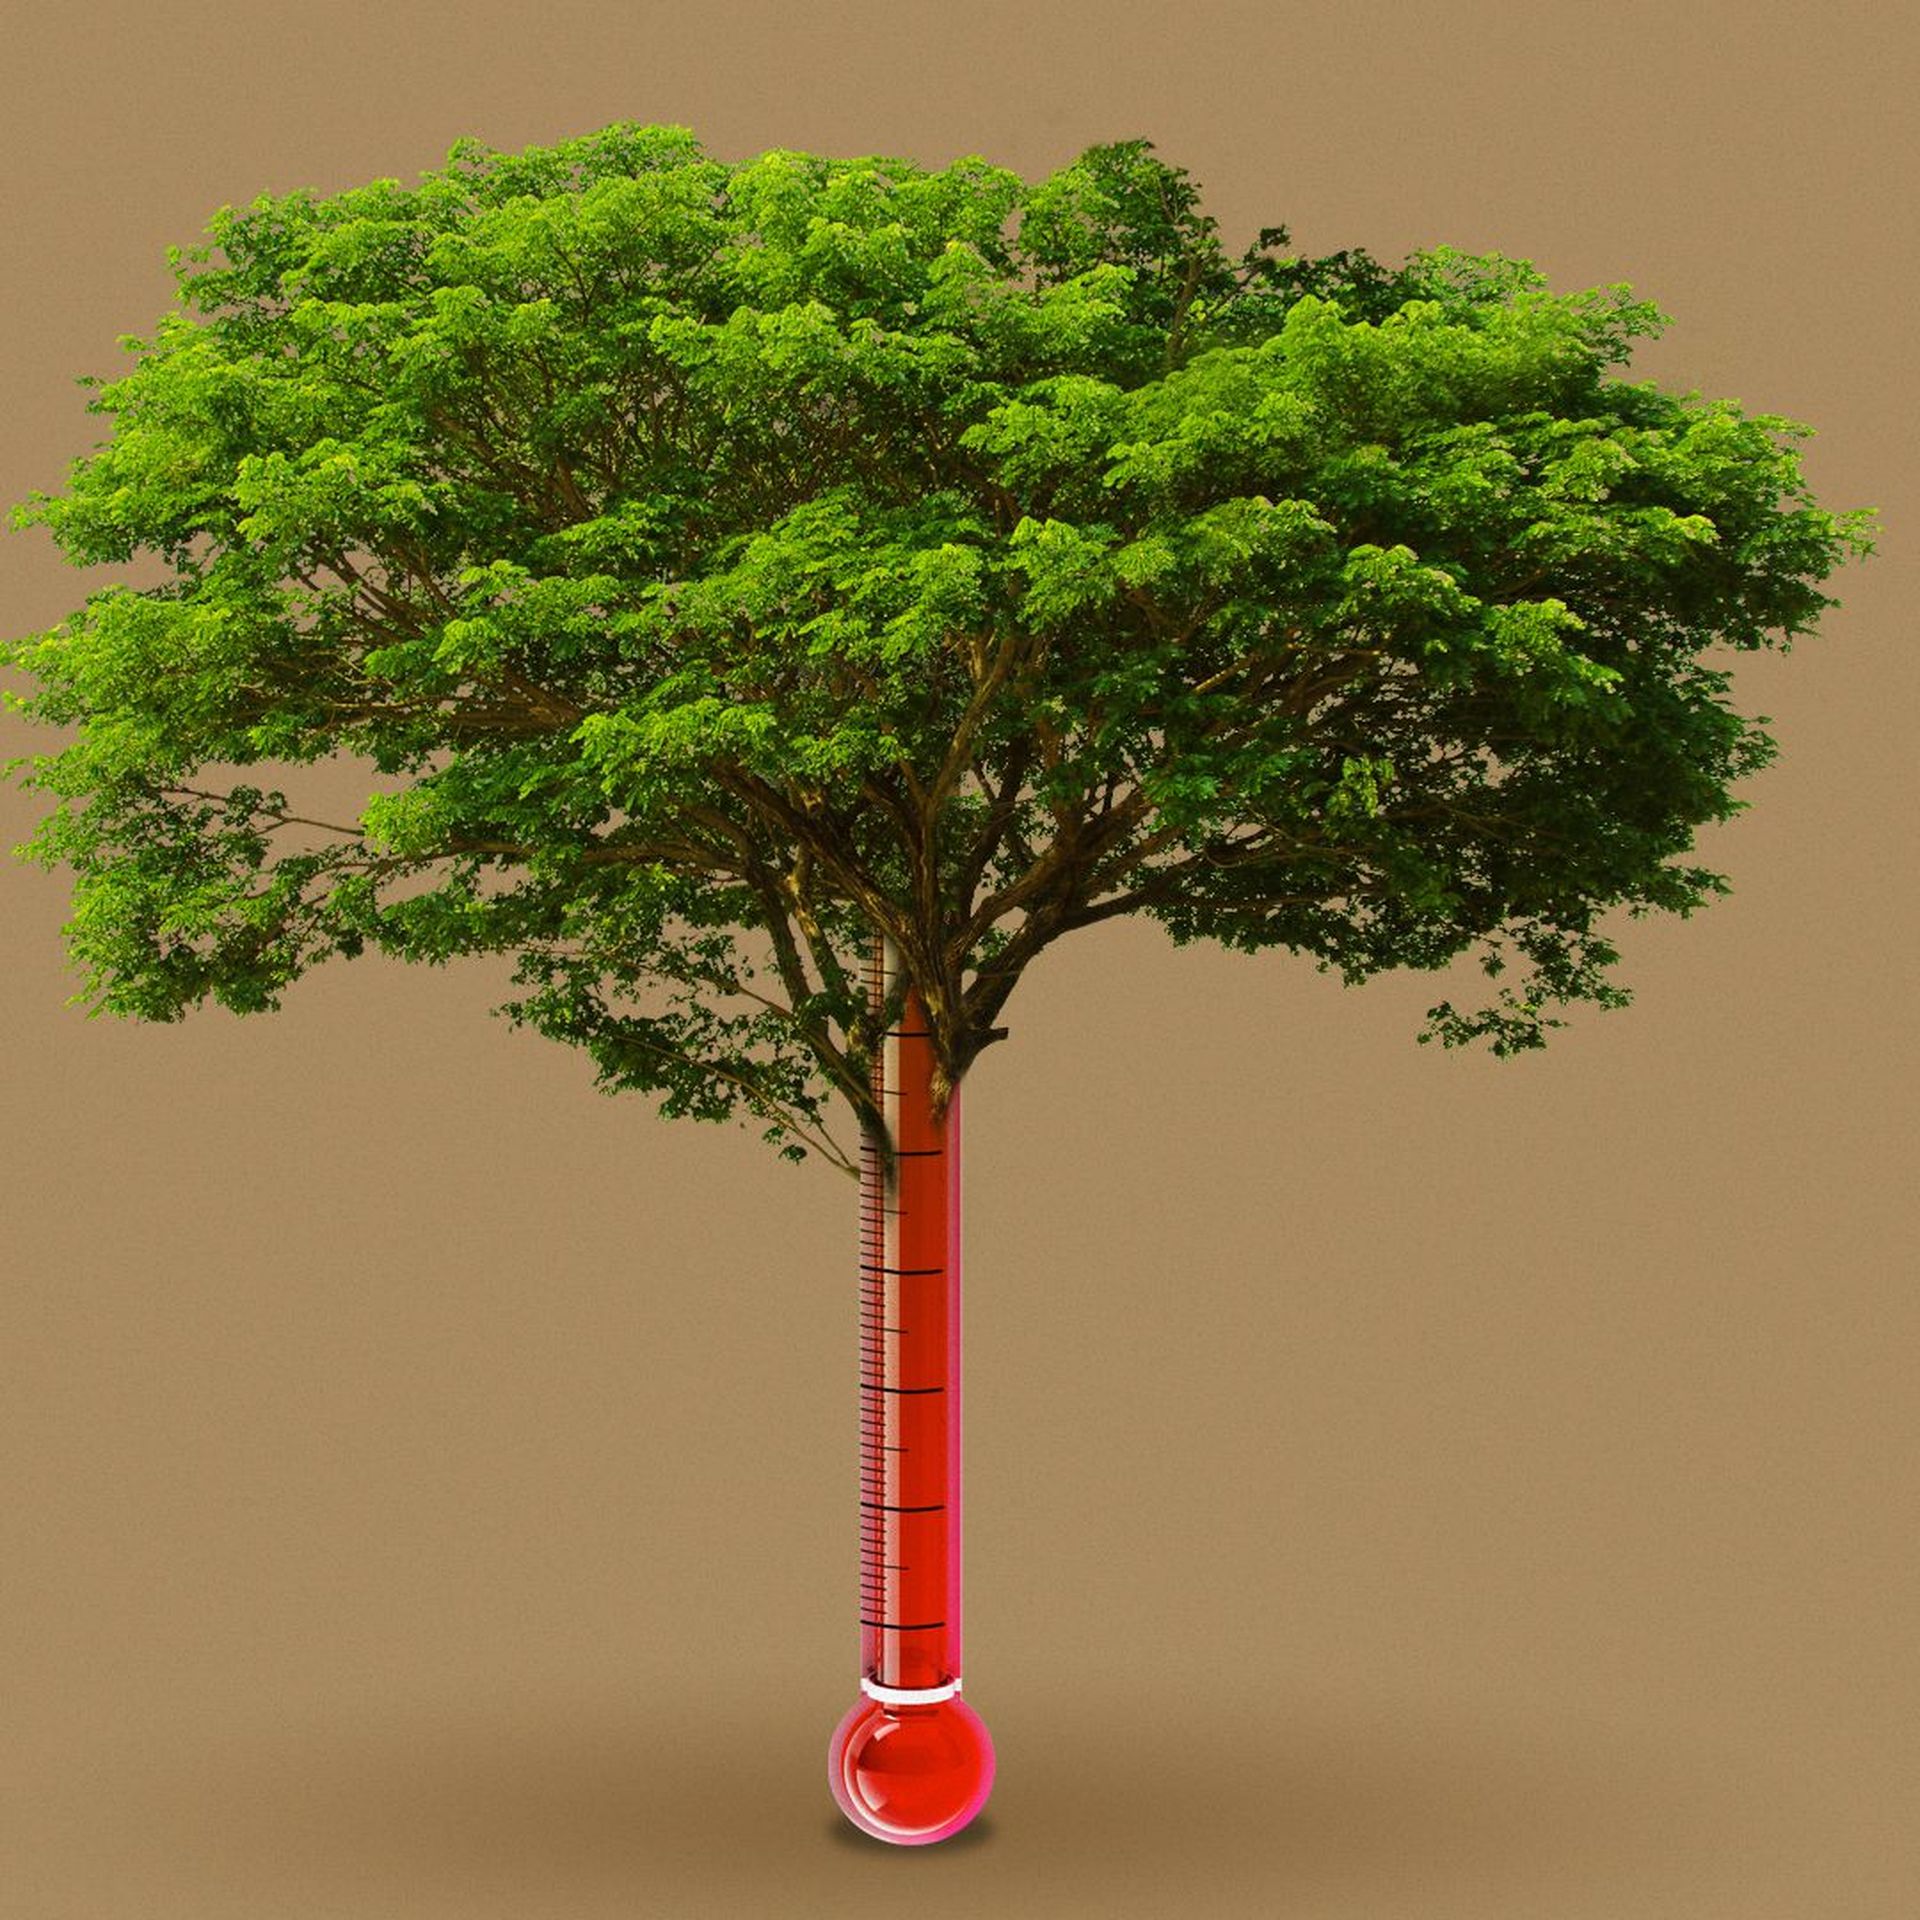 Illustration of a tree growing out of a thermometer with a high temperature.